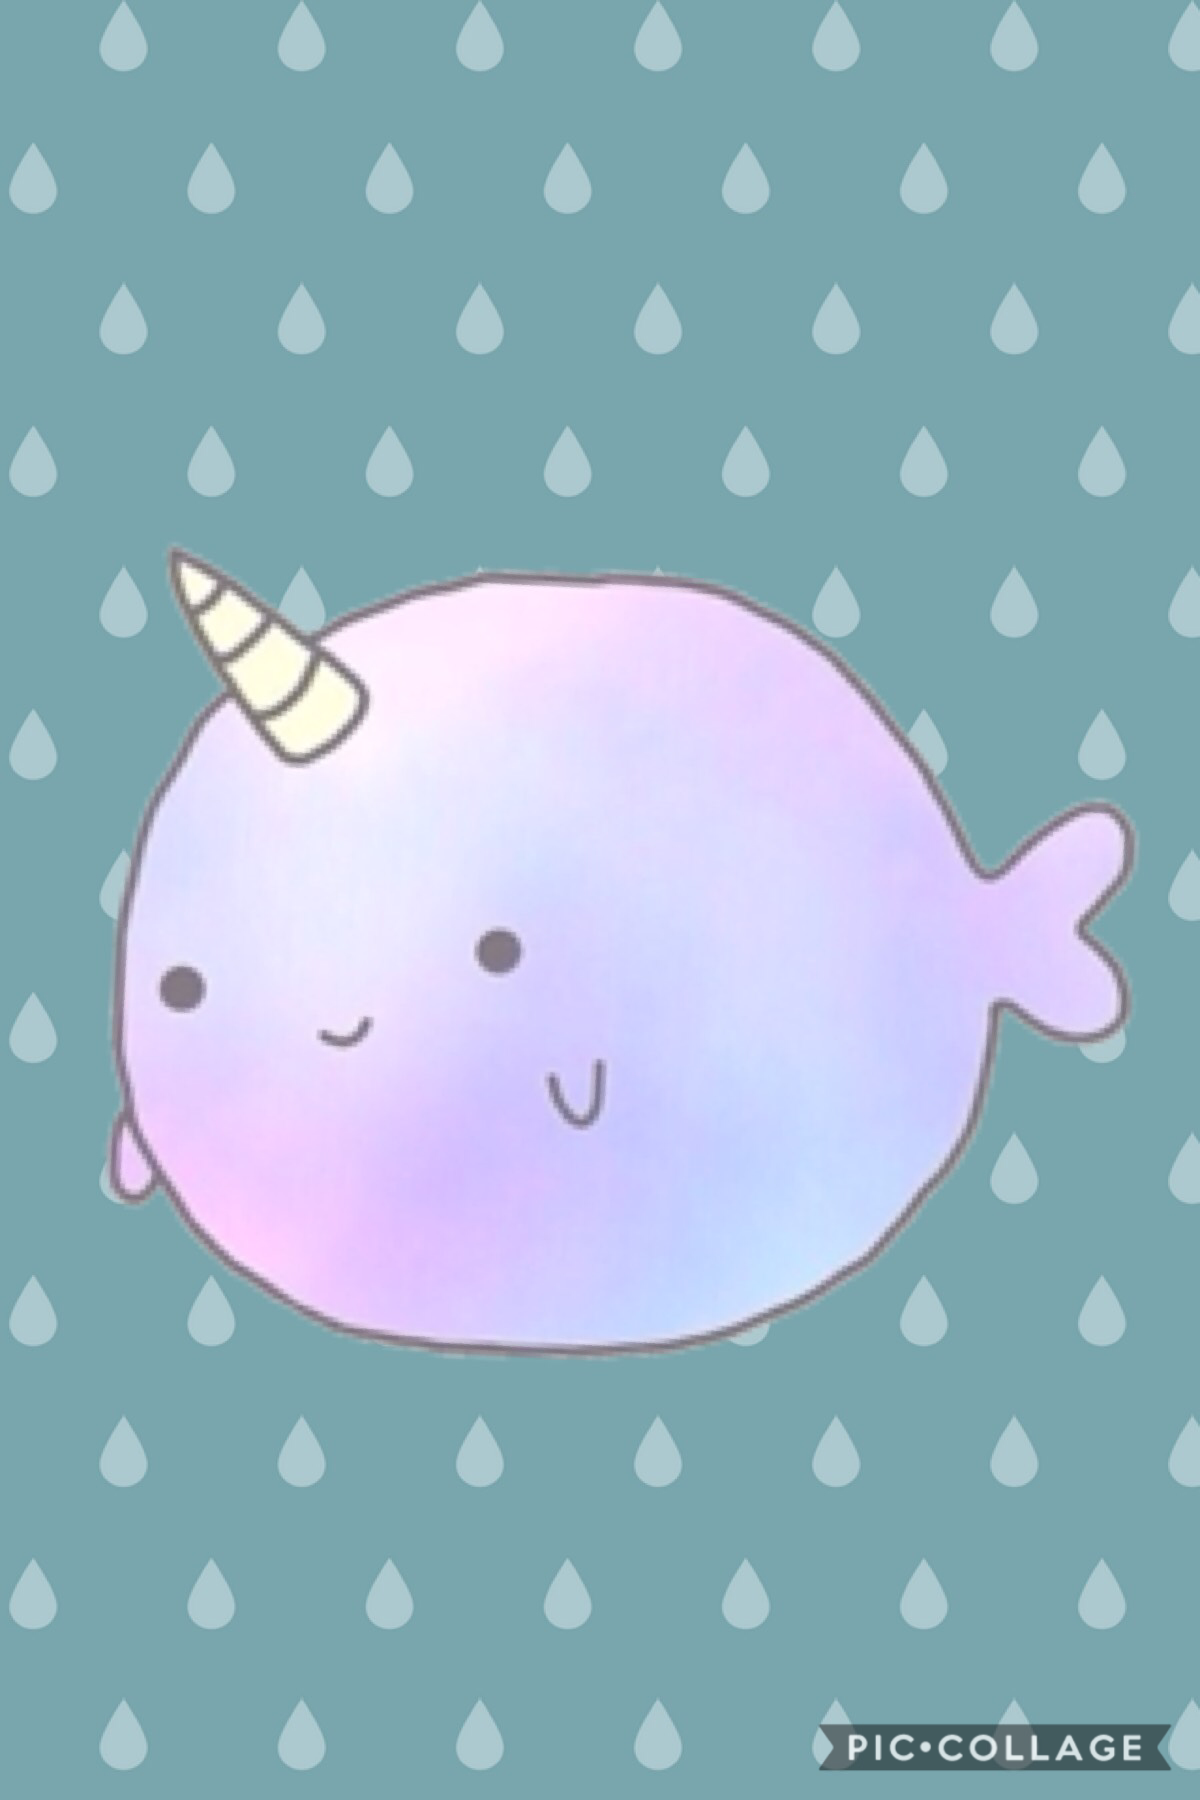 NOT SO NARWALS’!! UNICORN OF THE SEA!!!